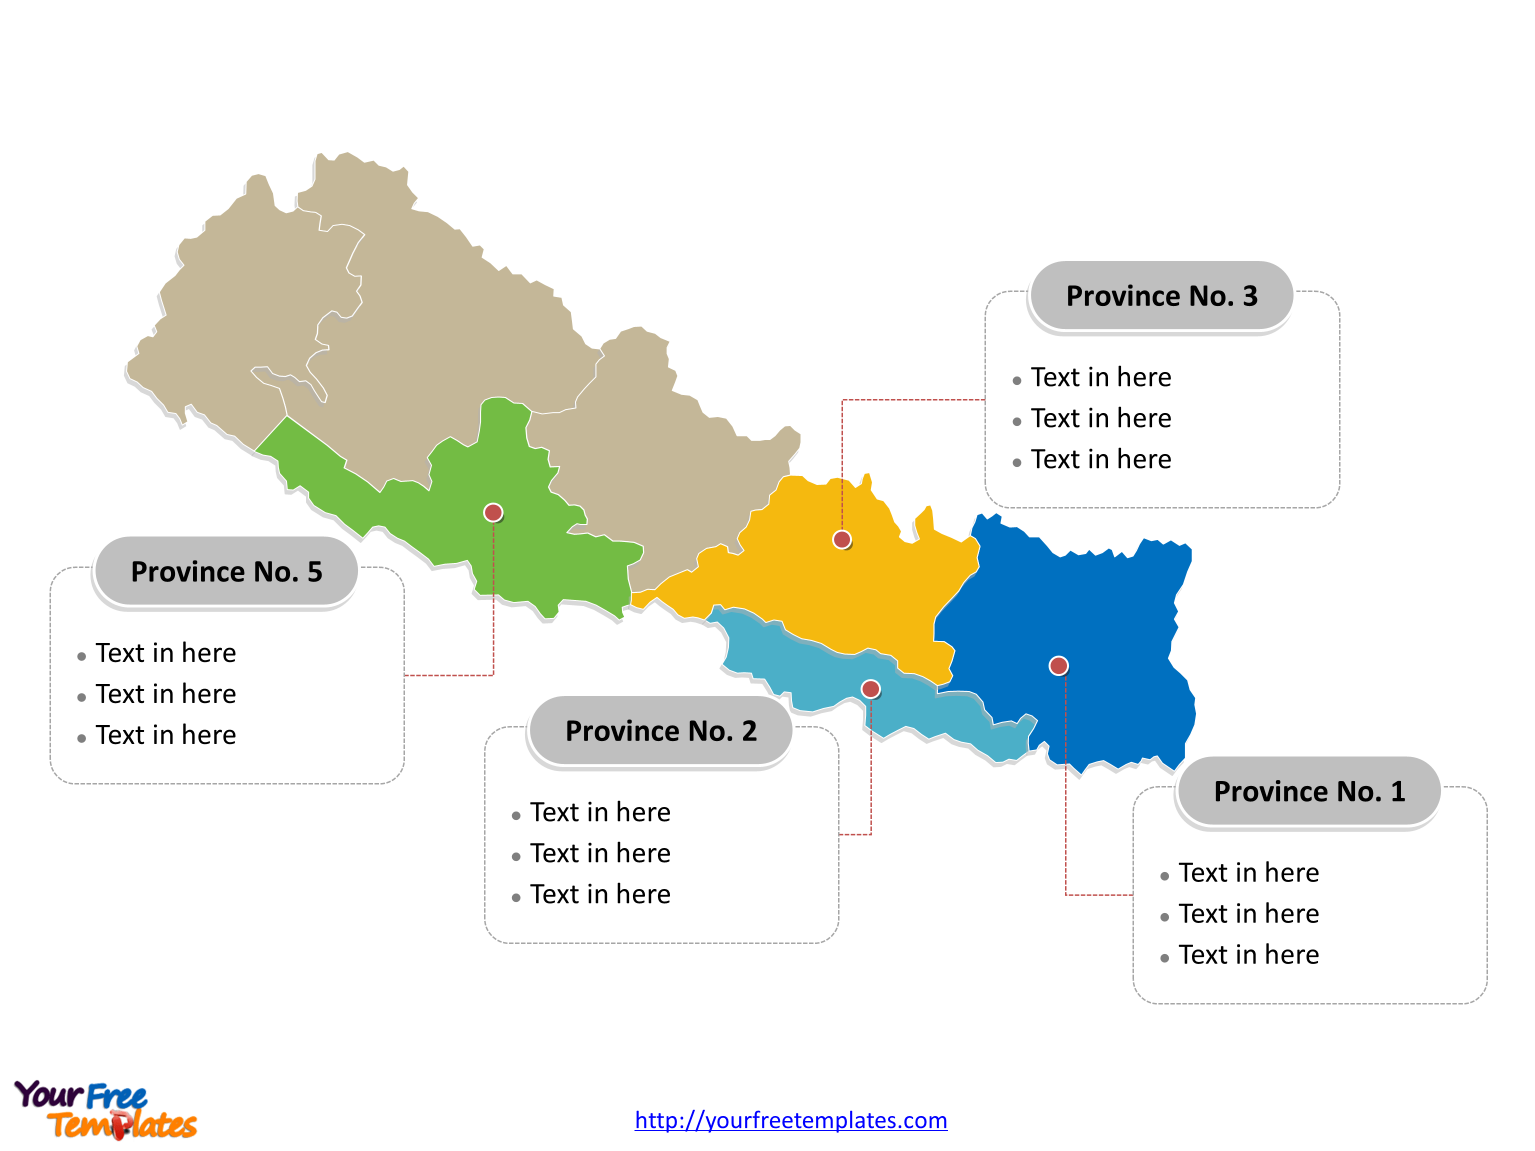 Nepal Outline map labeled with cities